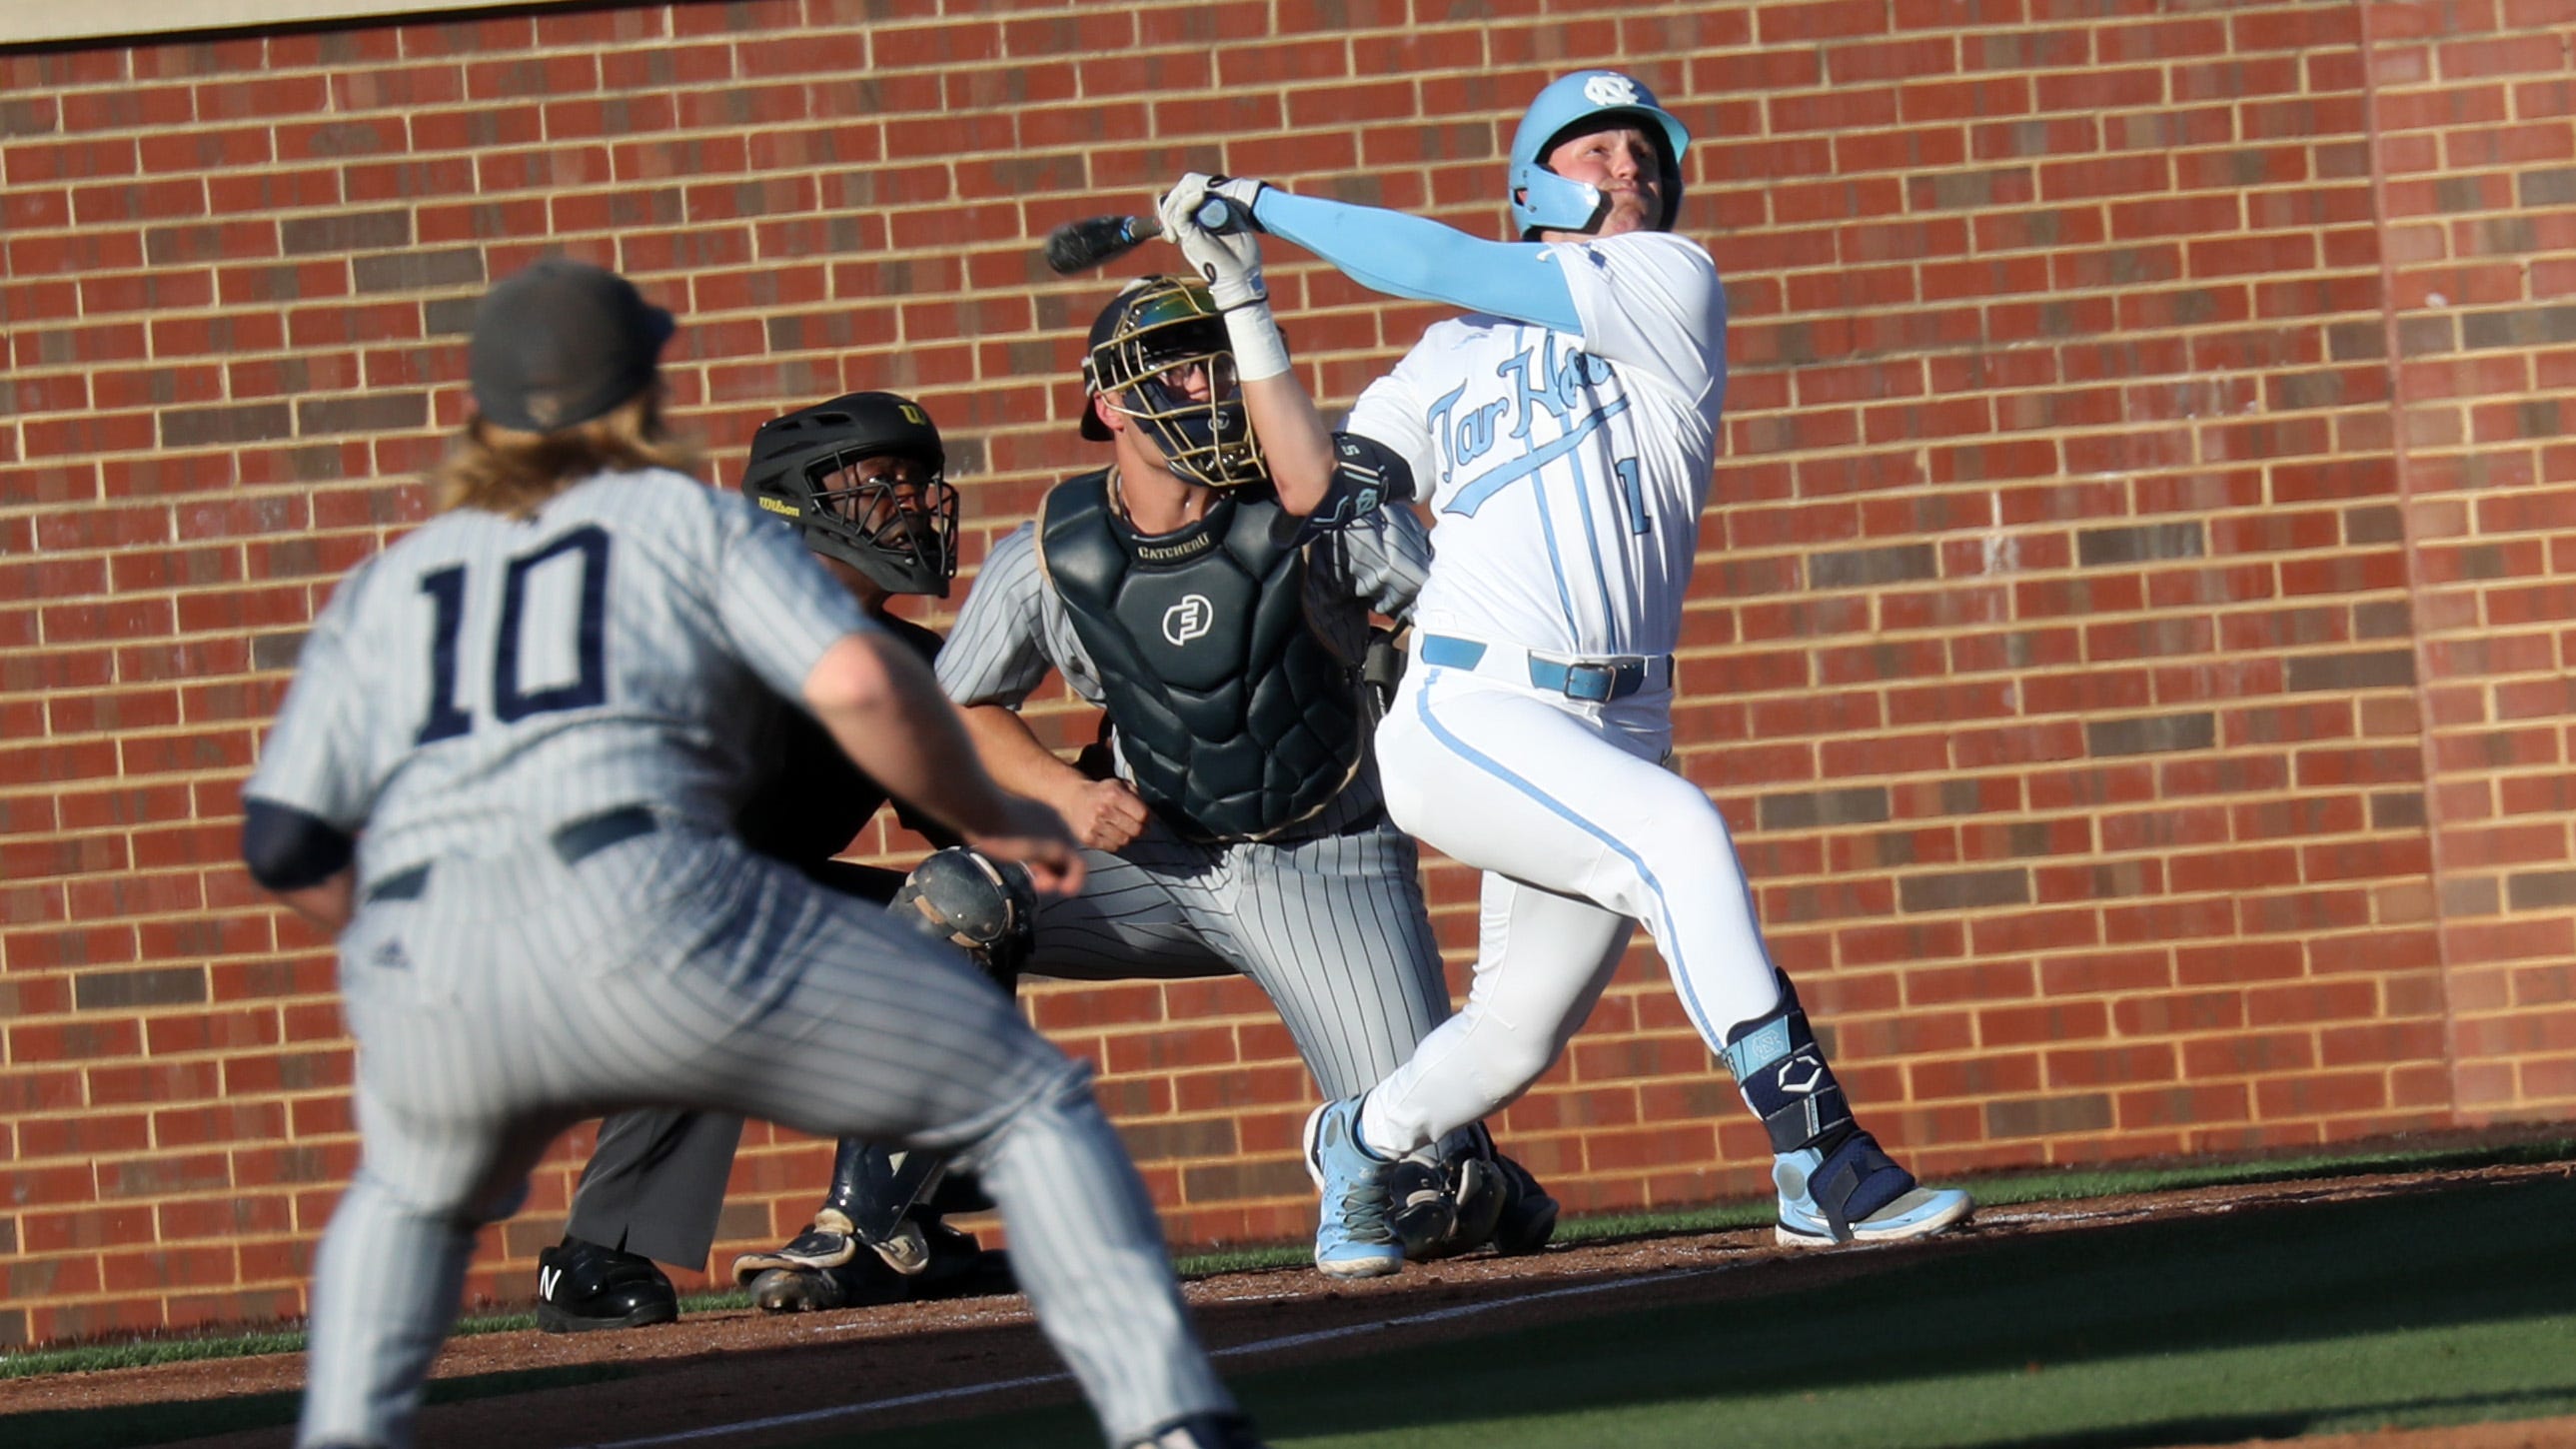 Local college baseball notes: Arm trouble slows Brannon